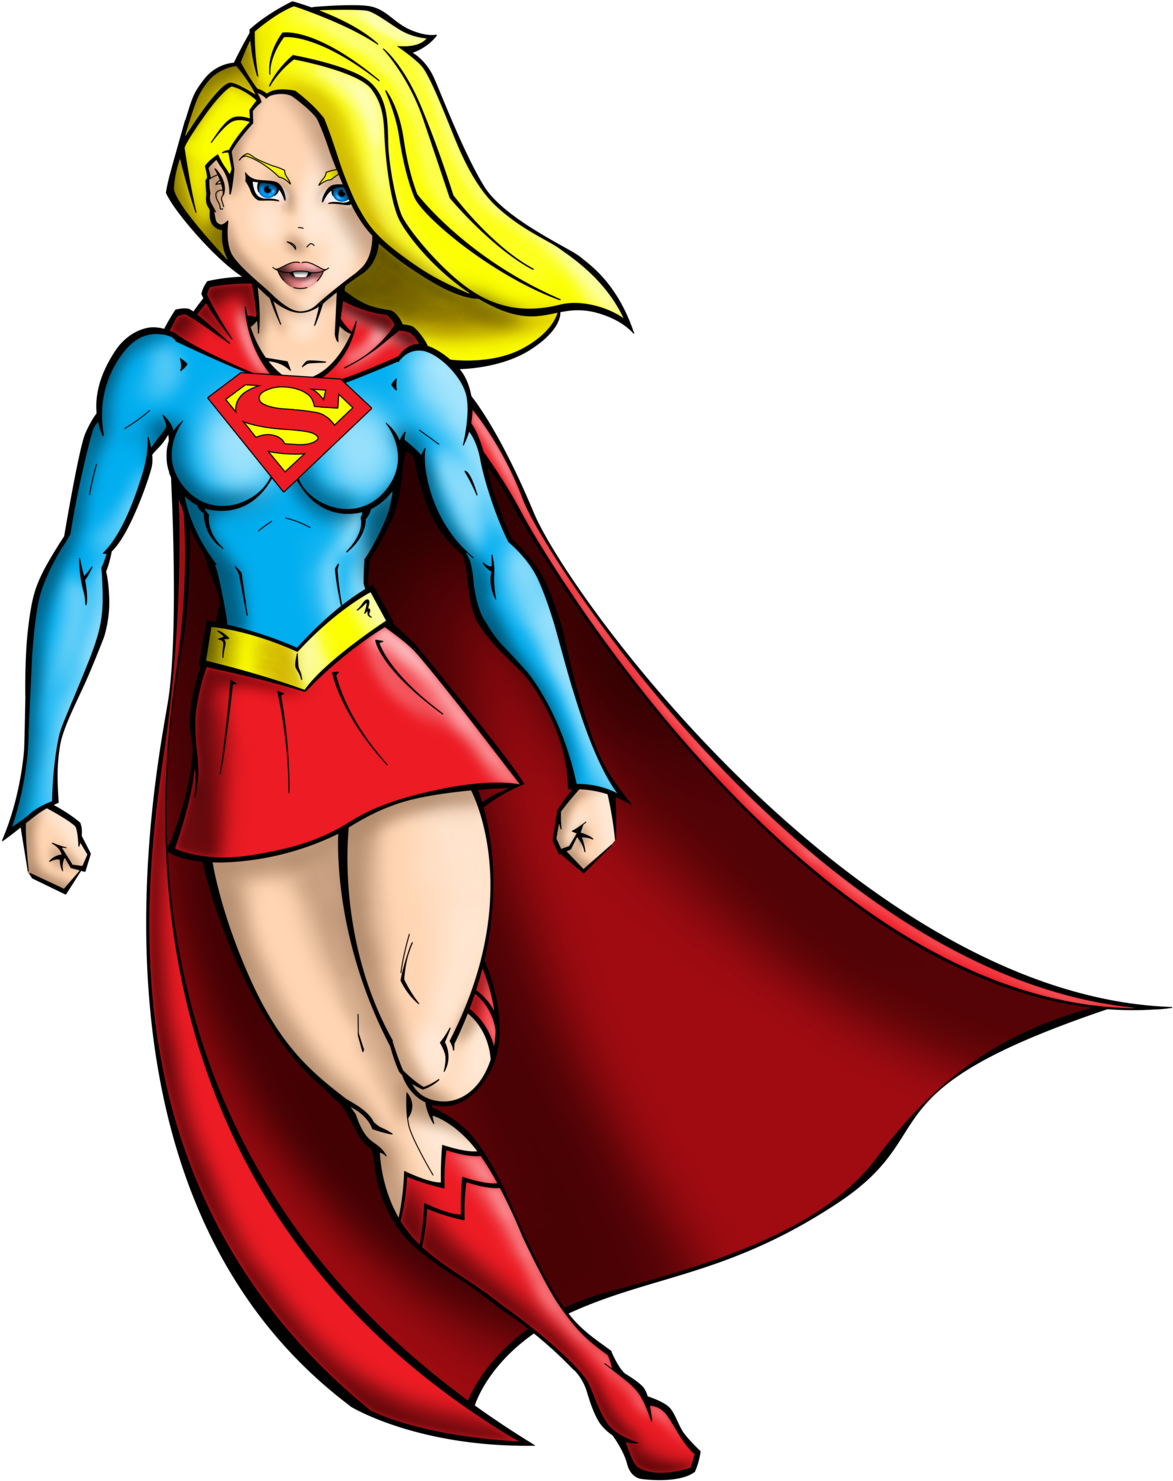 Supergirl Color By Jest84 Supergirl Color By Jest84 - Supergirl Fly Cartoon Png (1280x1557)